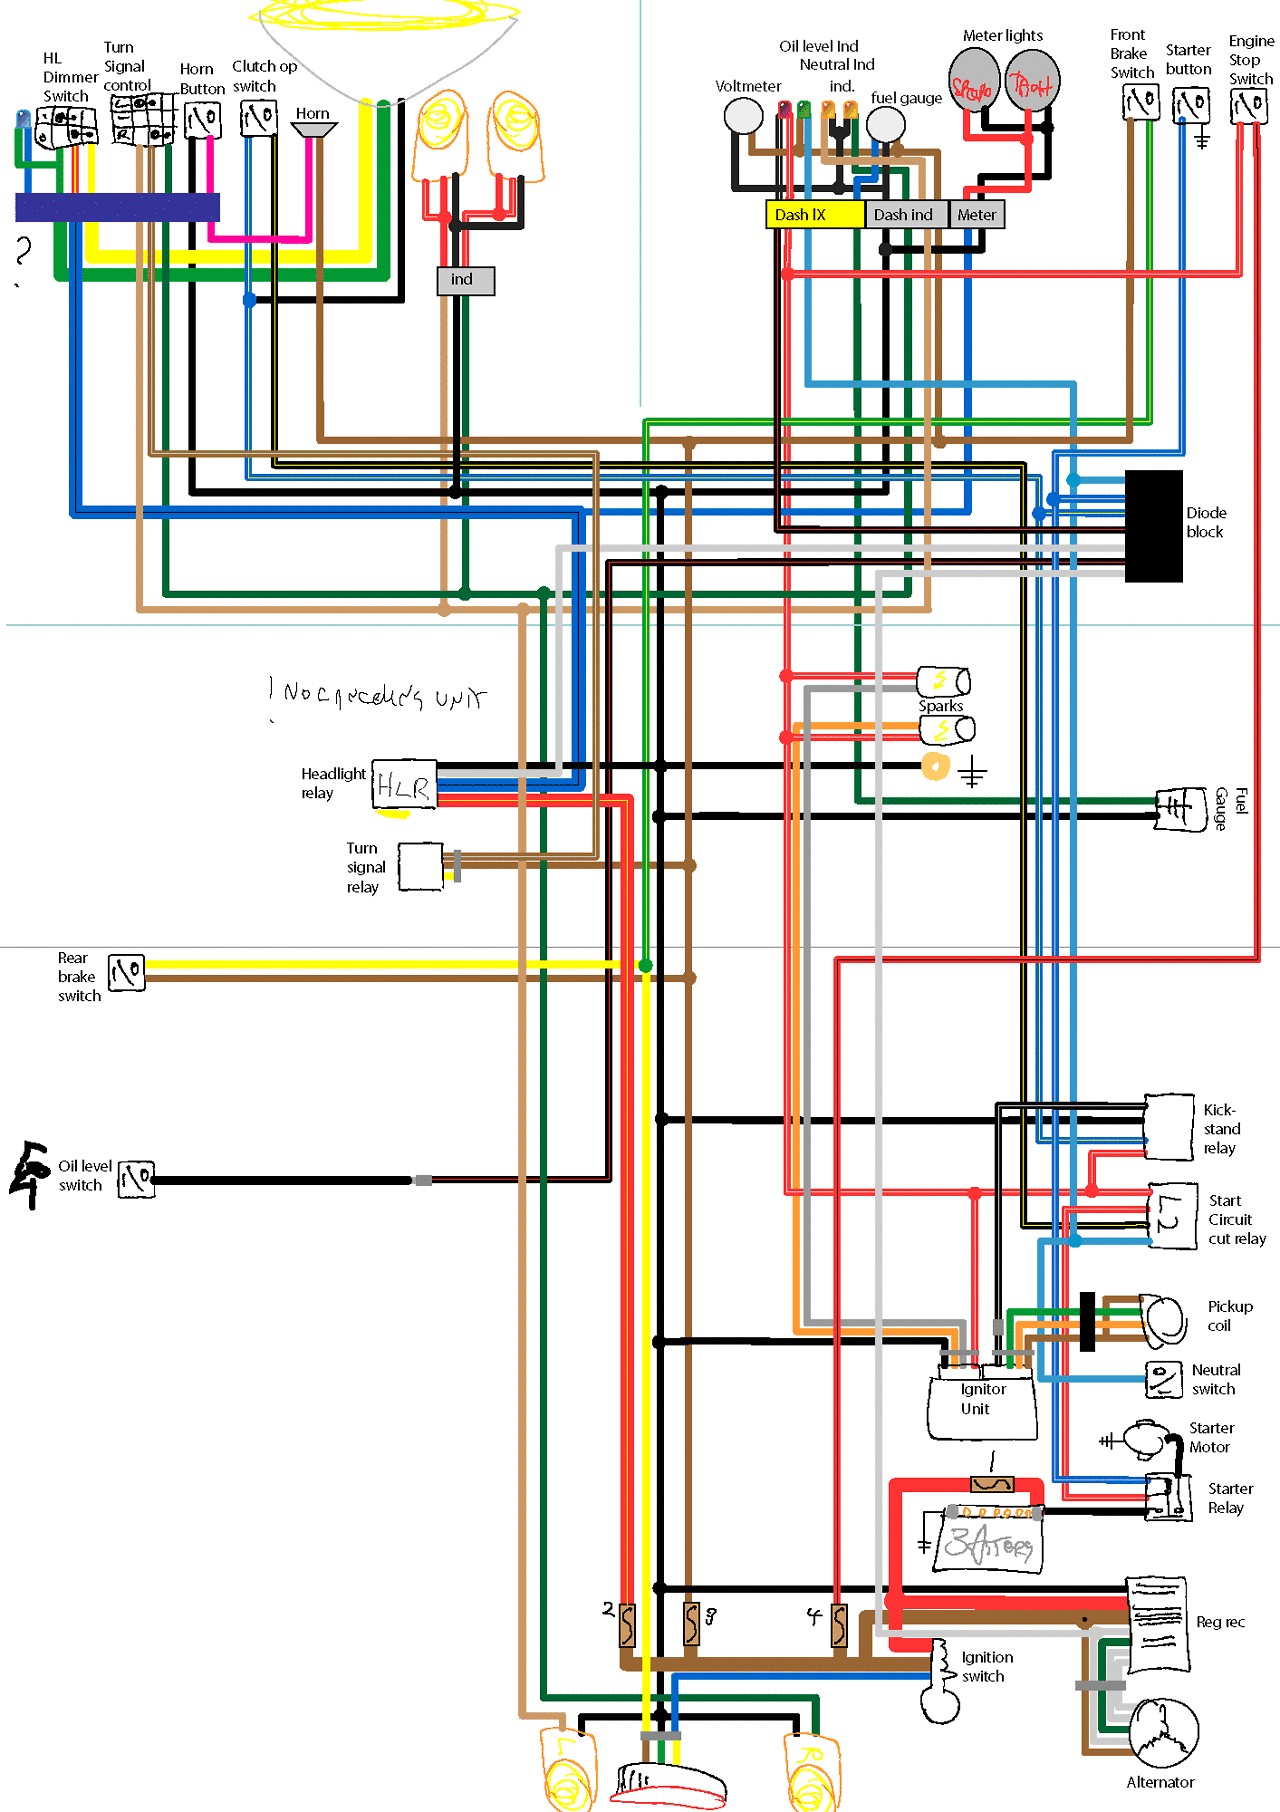 Motorcycle Wiring Diagram This Image to Show the Full Size Version Of Motorcycle Wiring Diagram